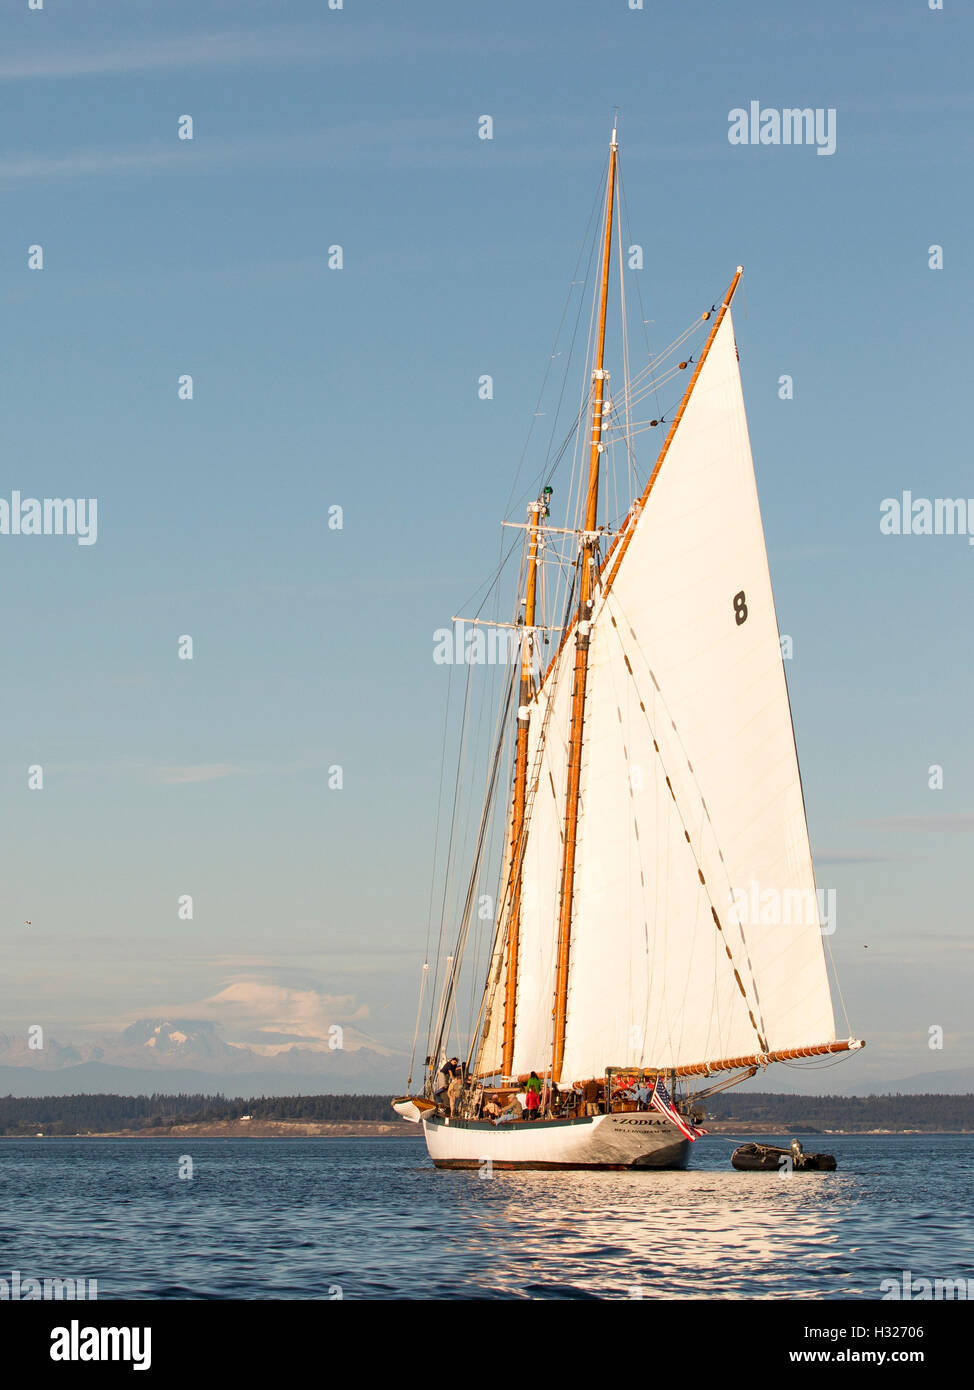 Sailing boat, sailboat wooden boat schooner Zodiac sailing Port Townsend bay, Puget Sound with Mount Baker in background. Stock Photo